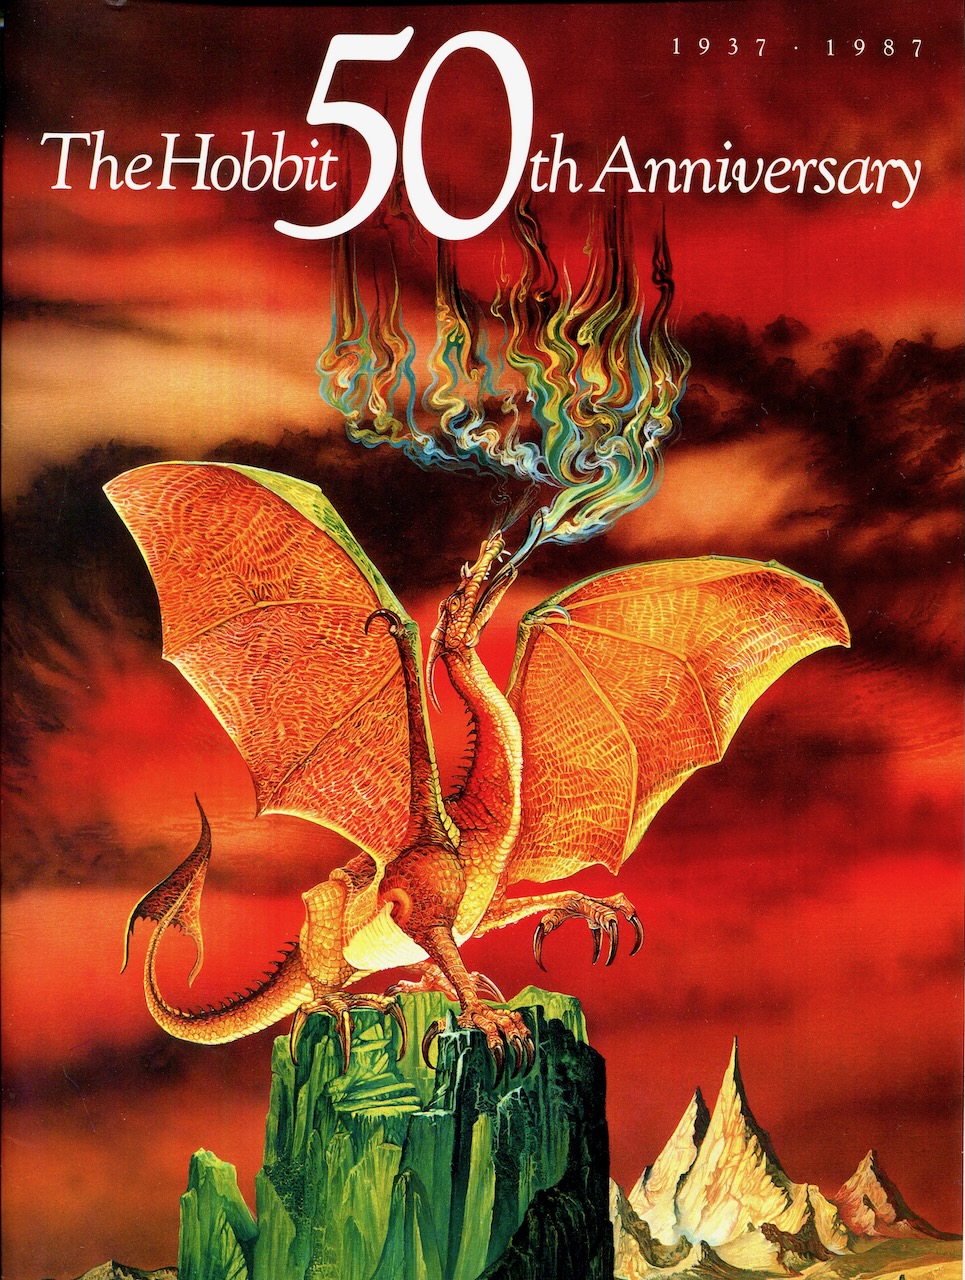 Image for The Hobbit 50th Anniversary Press Kit